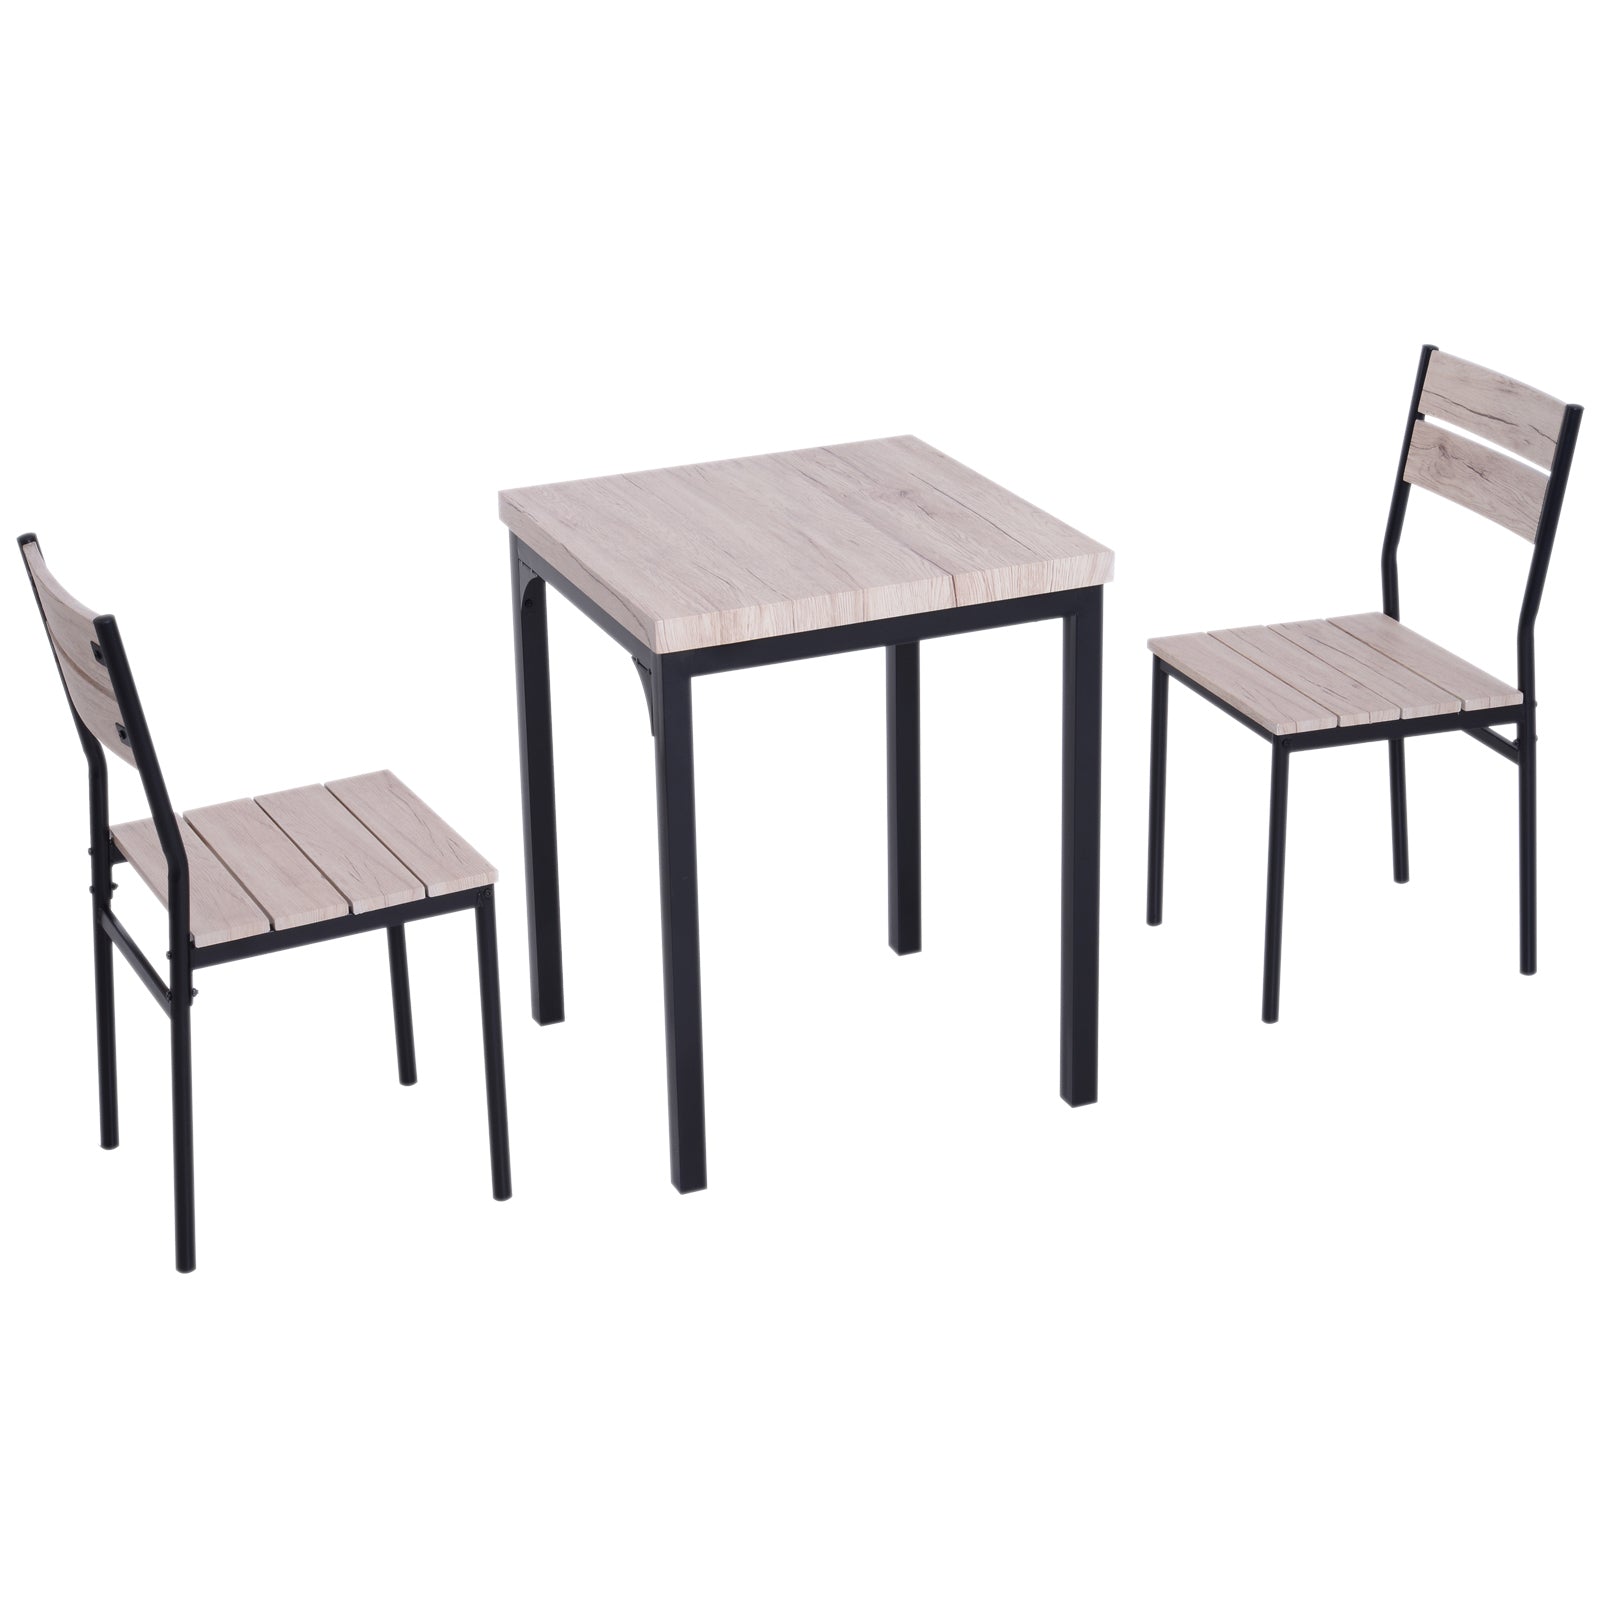 Nancy's Stillwater Dining Table Set - 3-Piece - 1 Dining Table - 2 Dining Chairs - MDF - Metal - Wood Look - Black